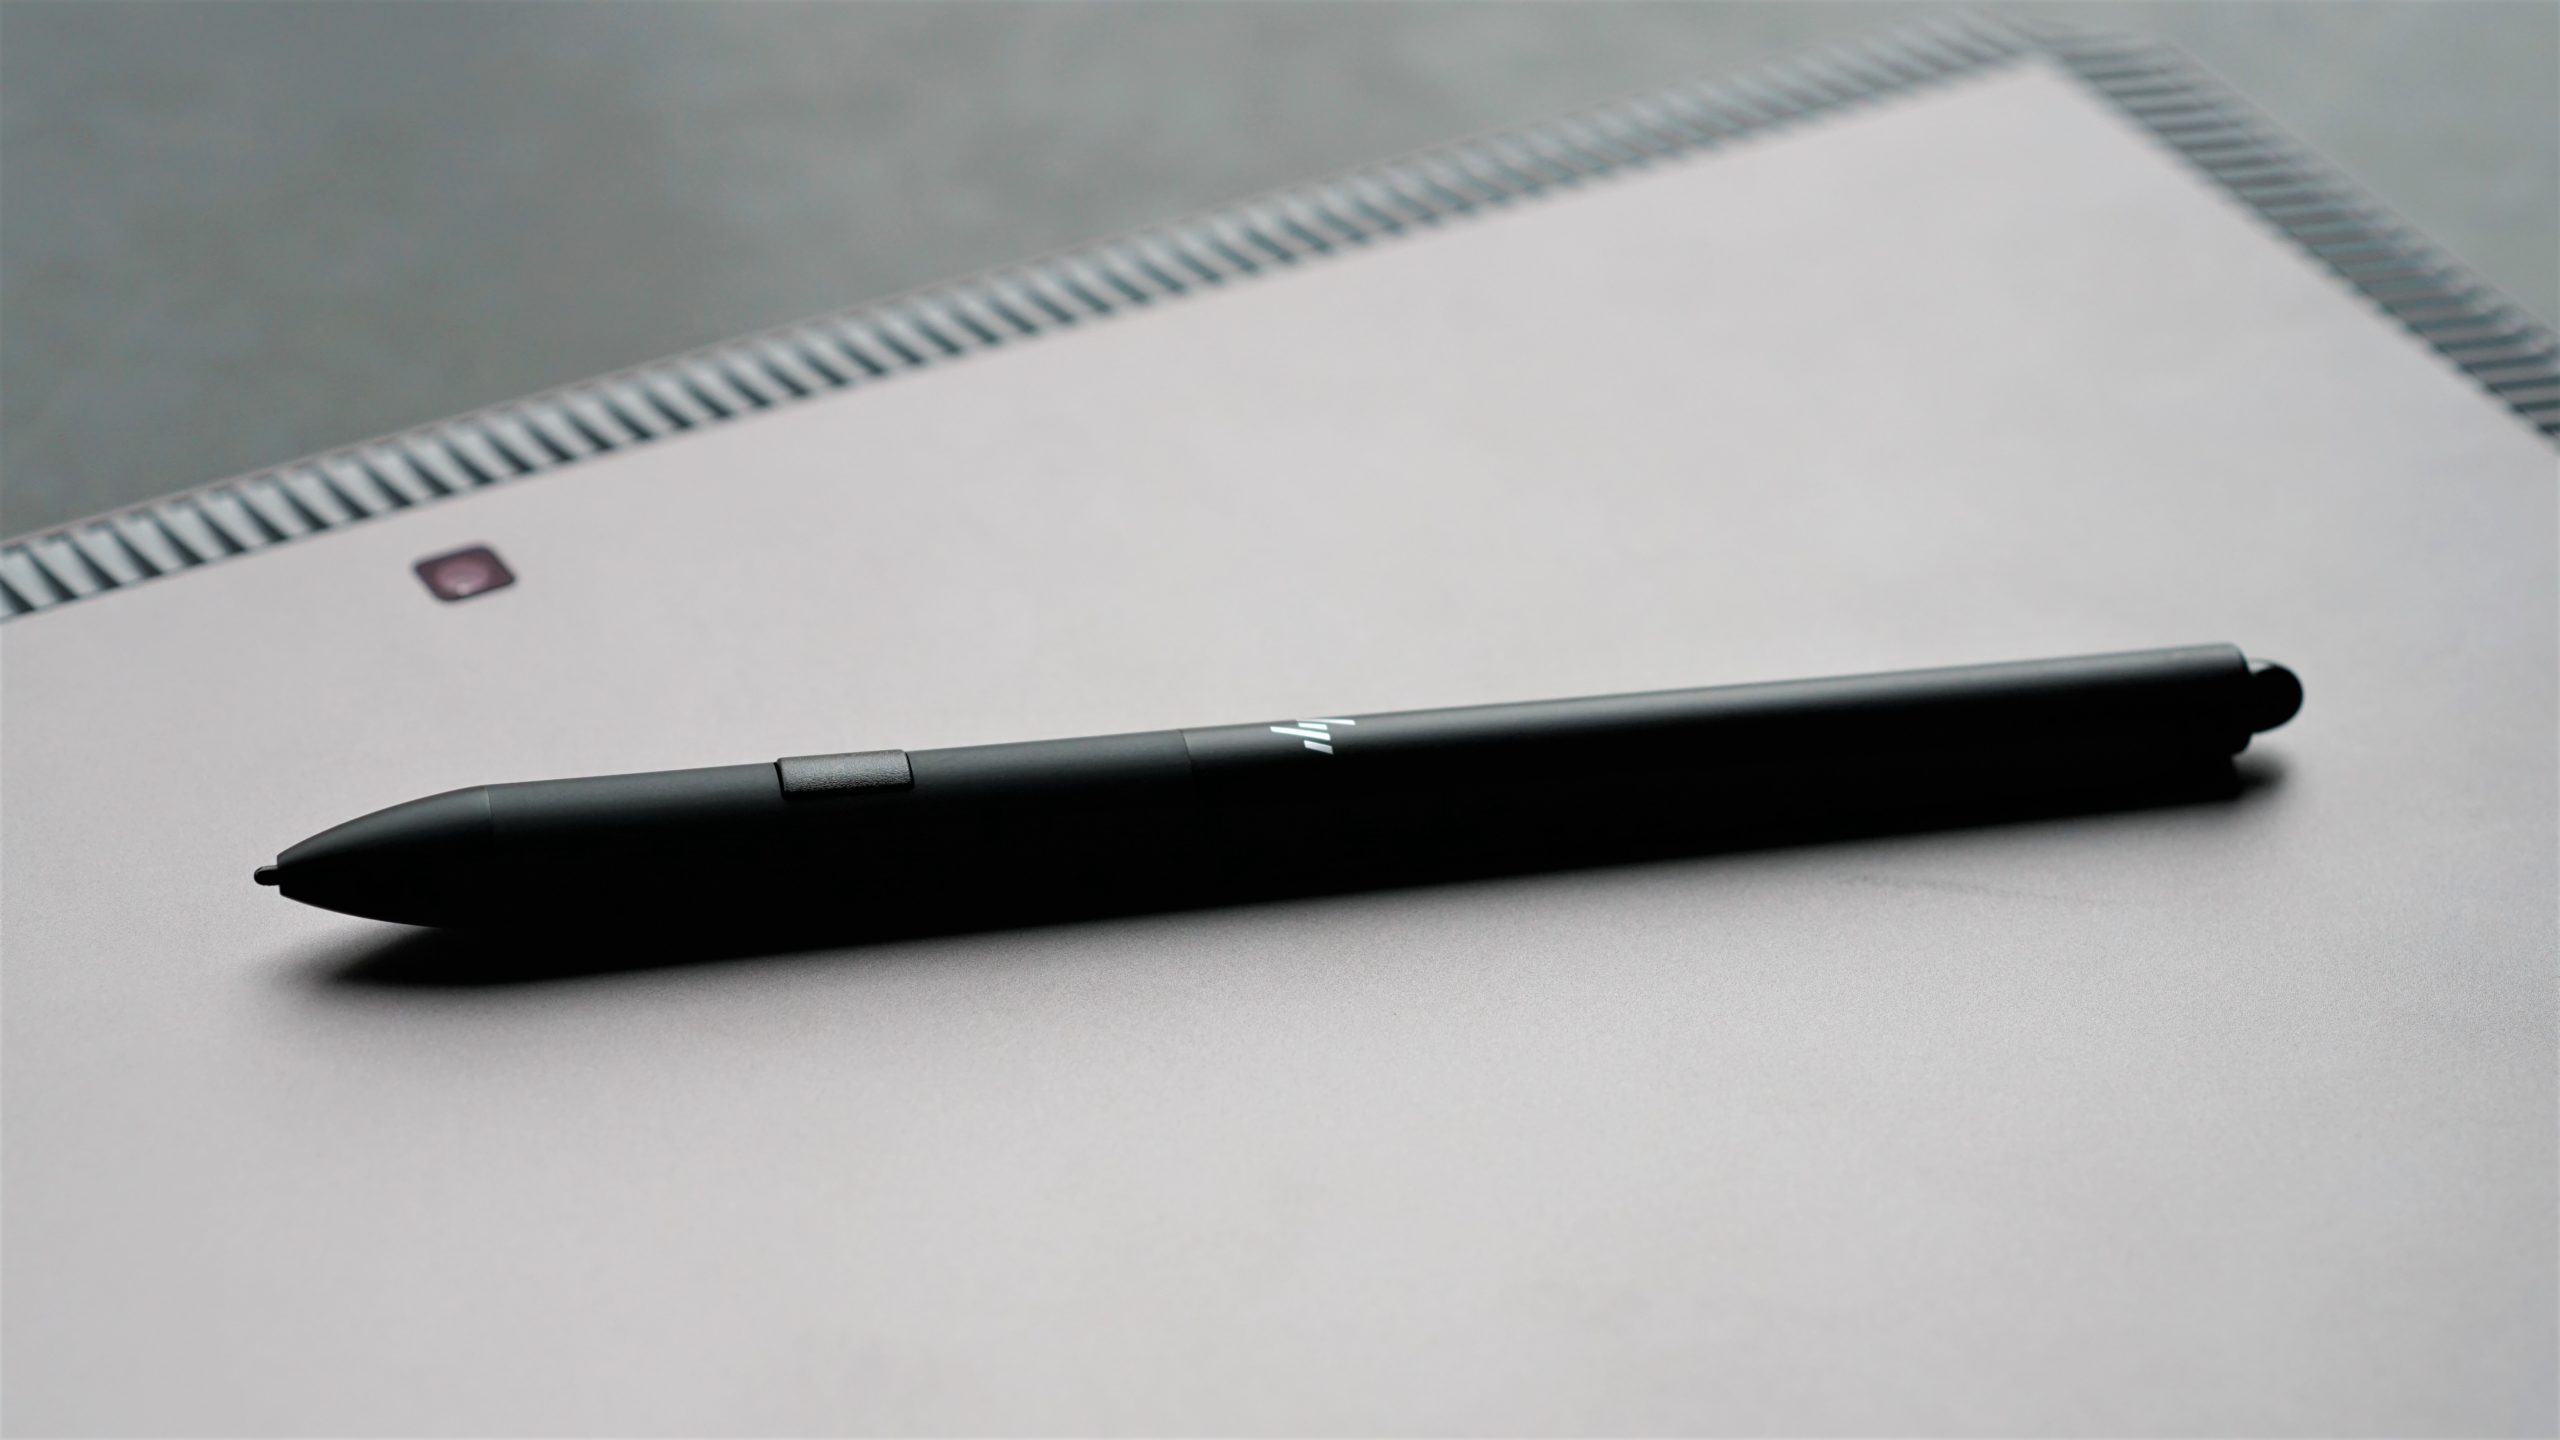 HP’s Overkill Convertible Makes Your Surface Pro Look Wimpy And Weak